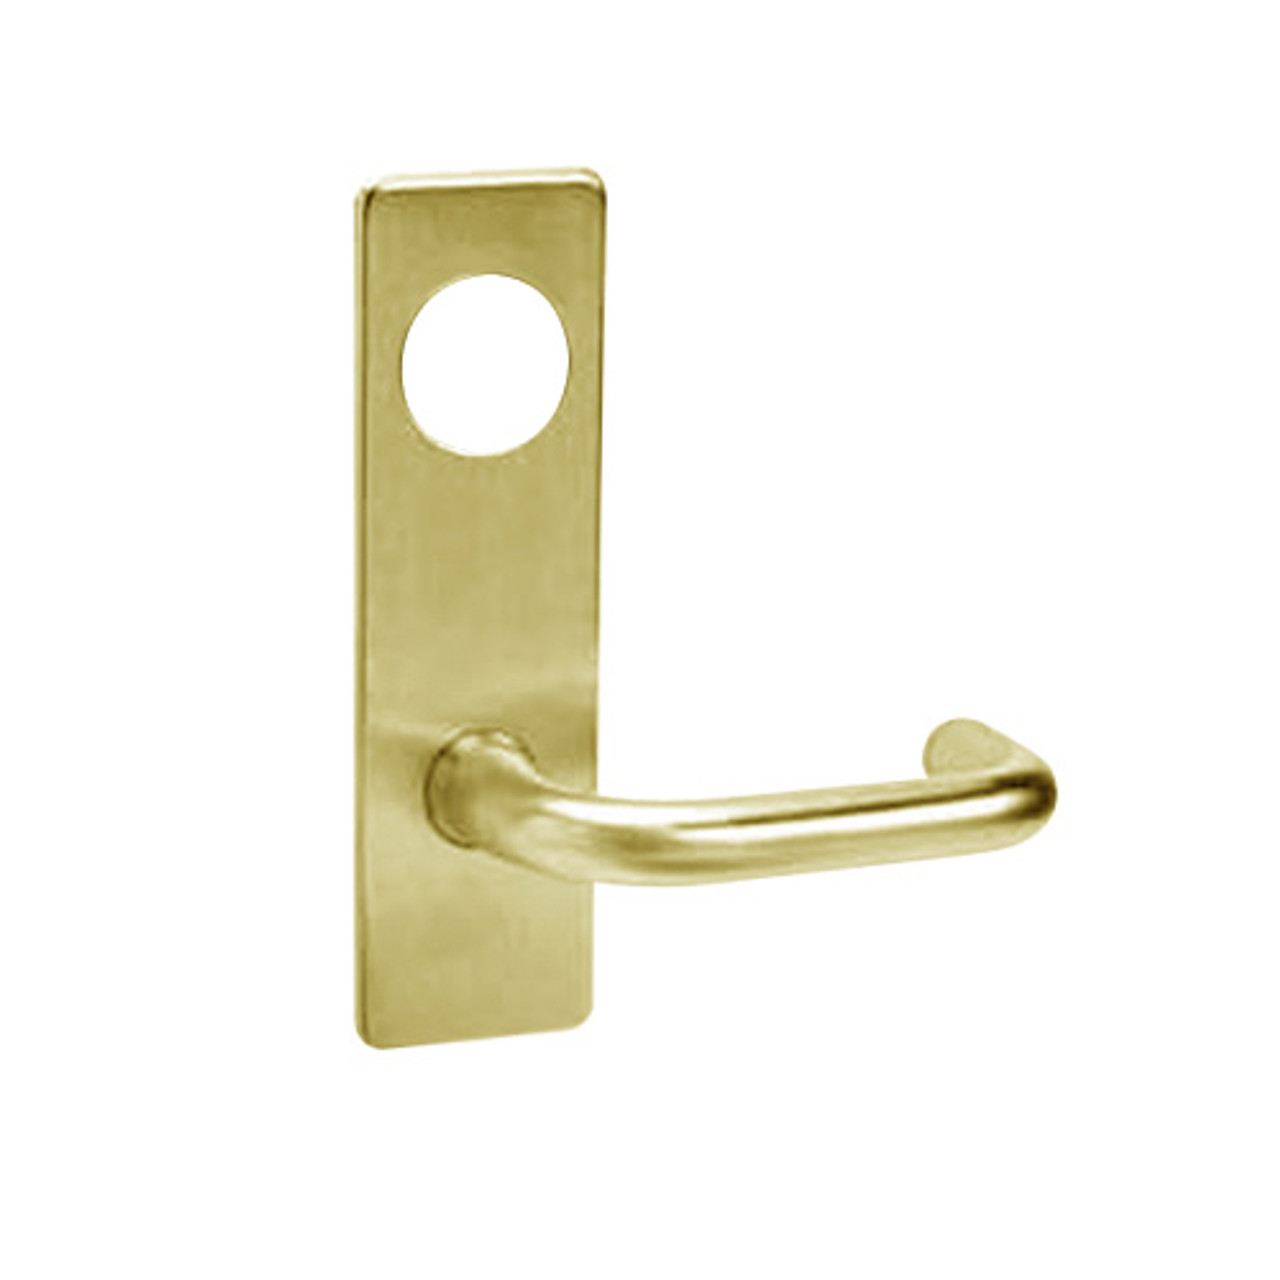 ML2069-LWM-606-LC Corbin Russwin ML2000 Series Mortise Institution Privacy Locksets with Lustra Lever in Satin Brass